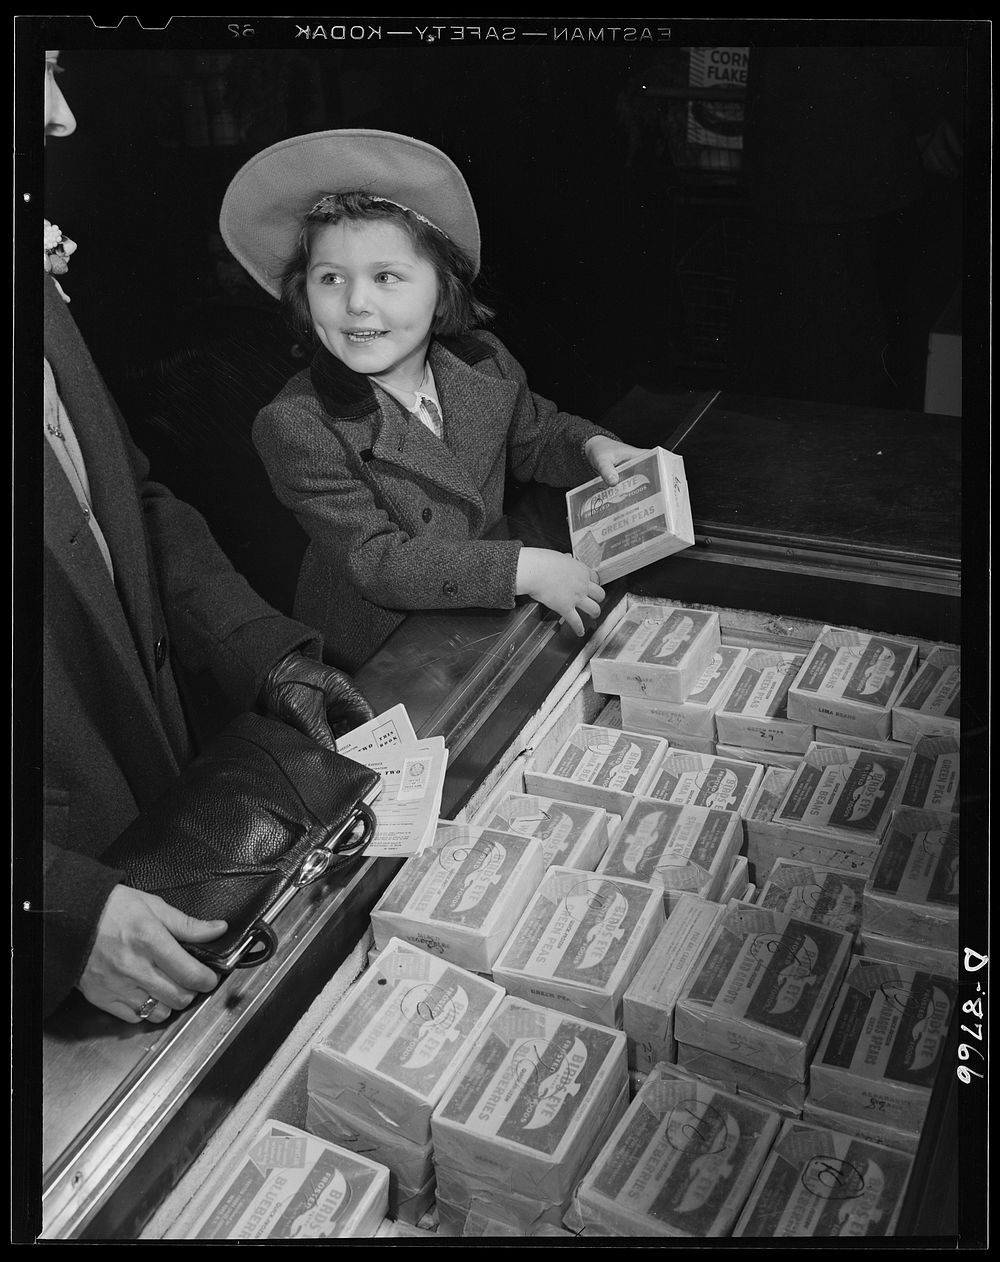 Preparation for point rationing. While mother keeps handy her war ration book two, daughter examines the frozen foods which…